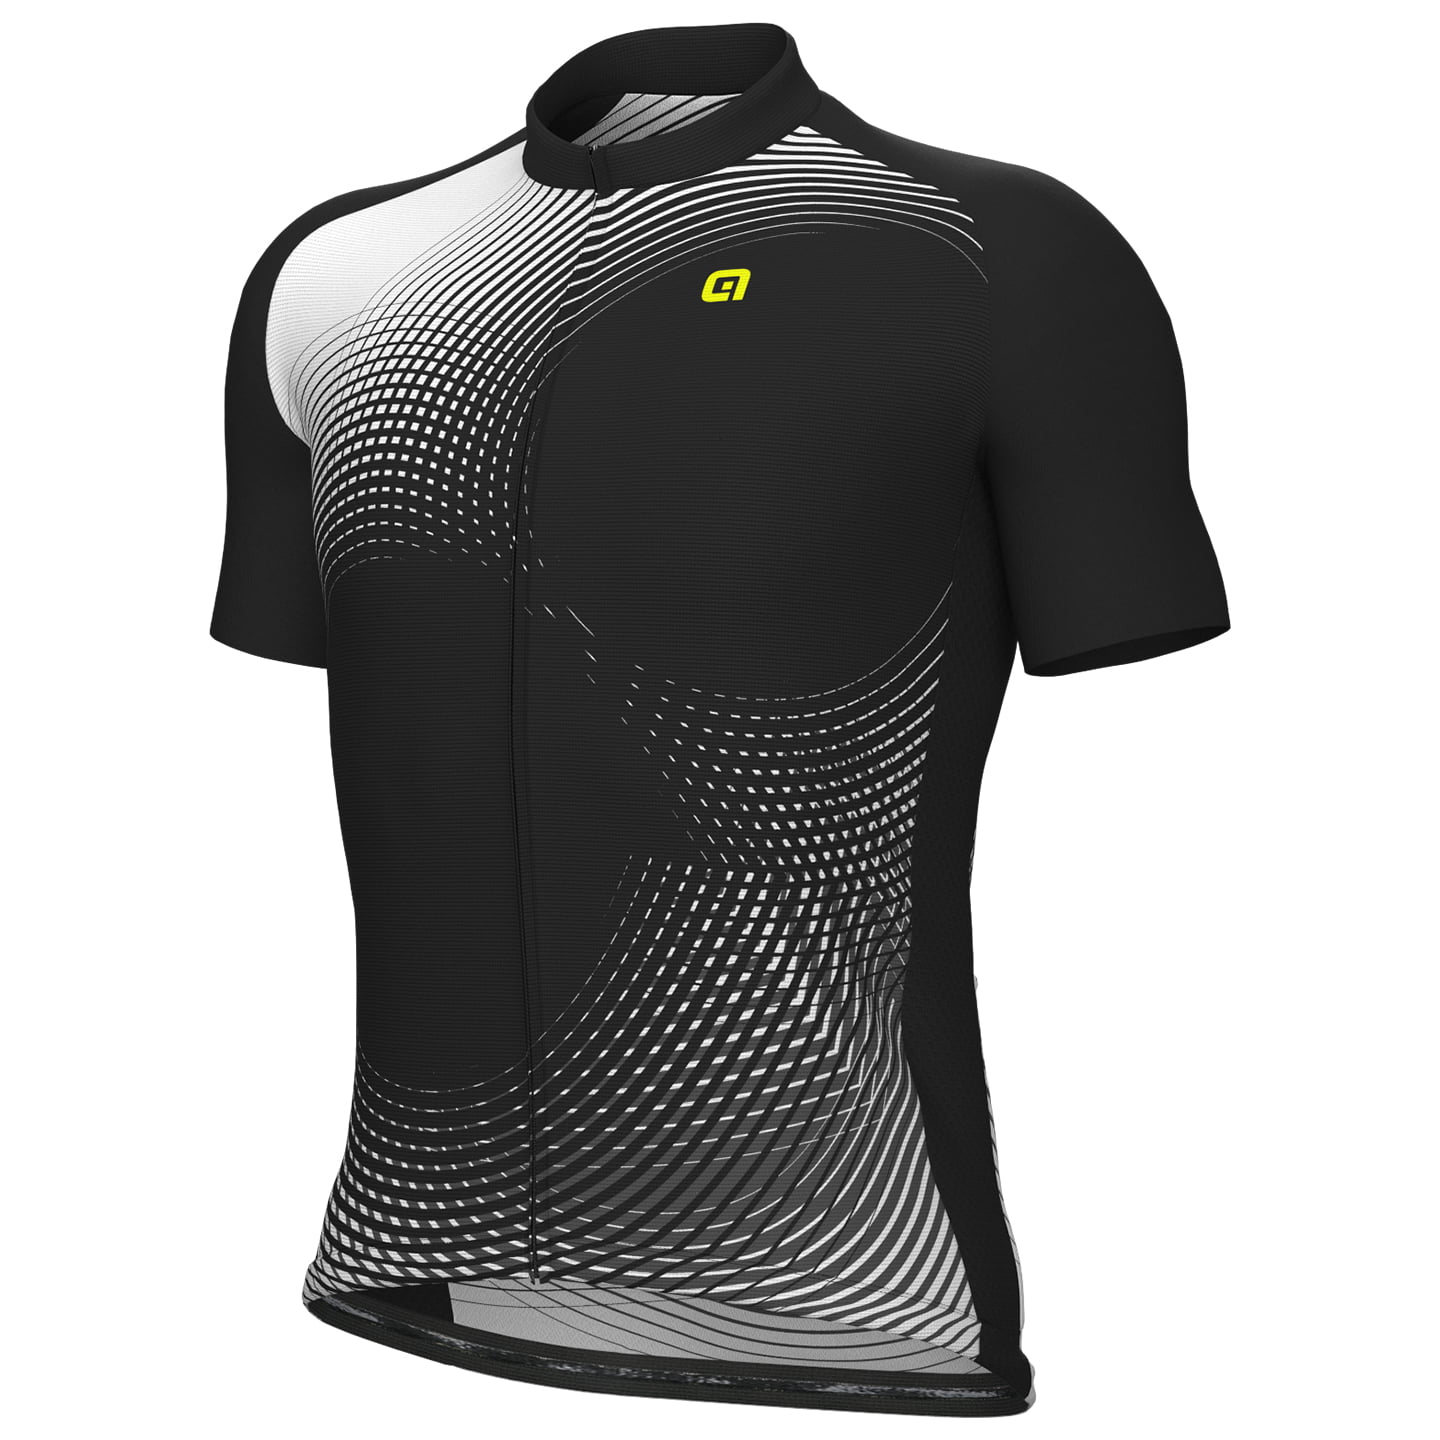 ALE Optical Short Sleeve Jersey, for men, size S, Cycling jersey, Cycling clothing